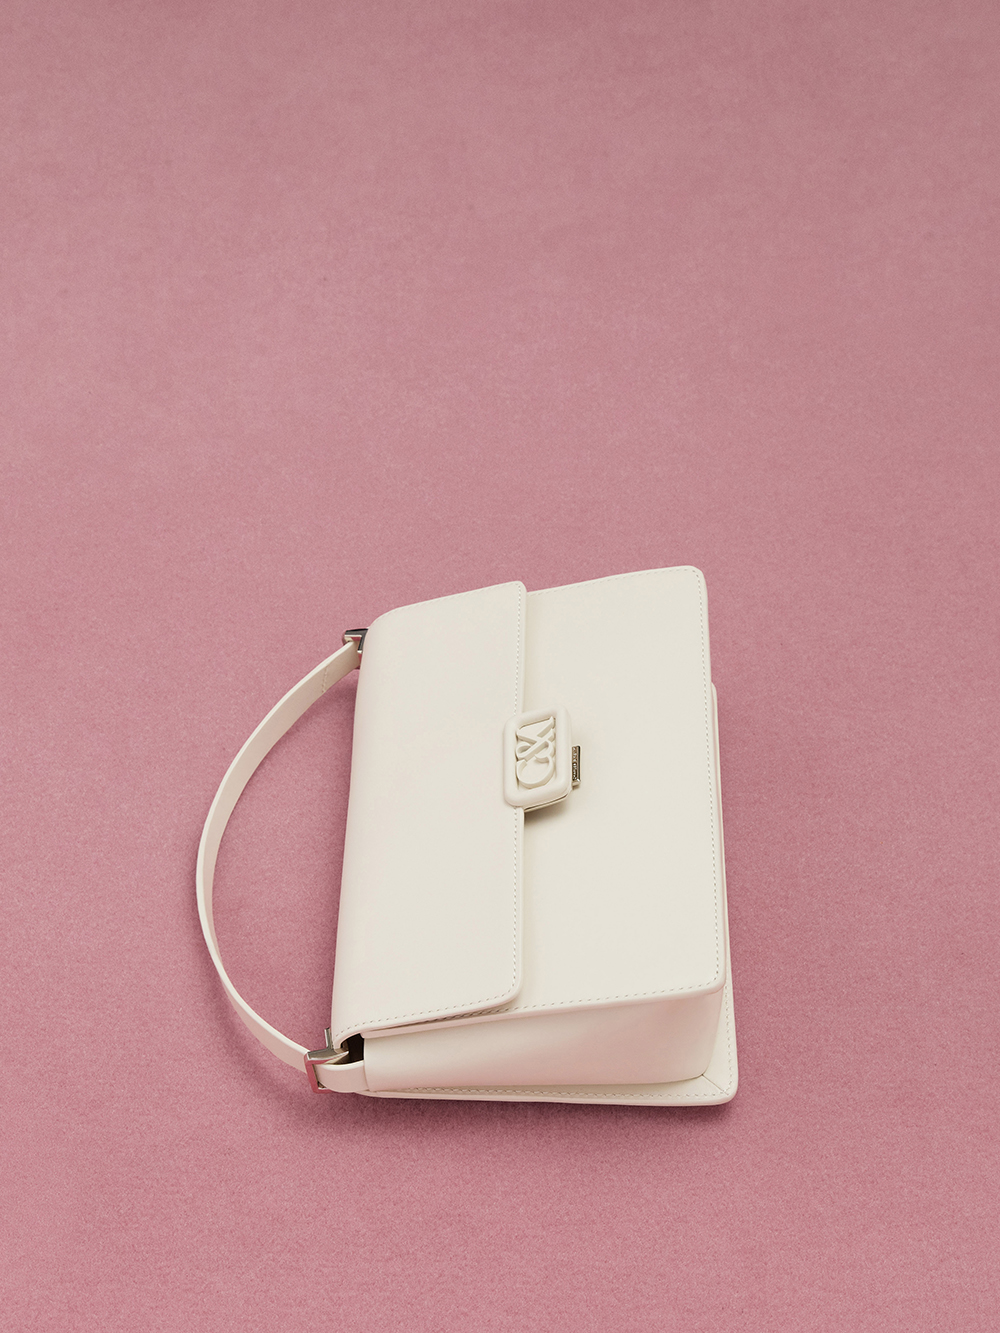 Women’s White Leather Shoulder Bag - CHARLES & KEITH